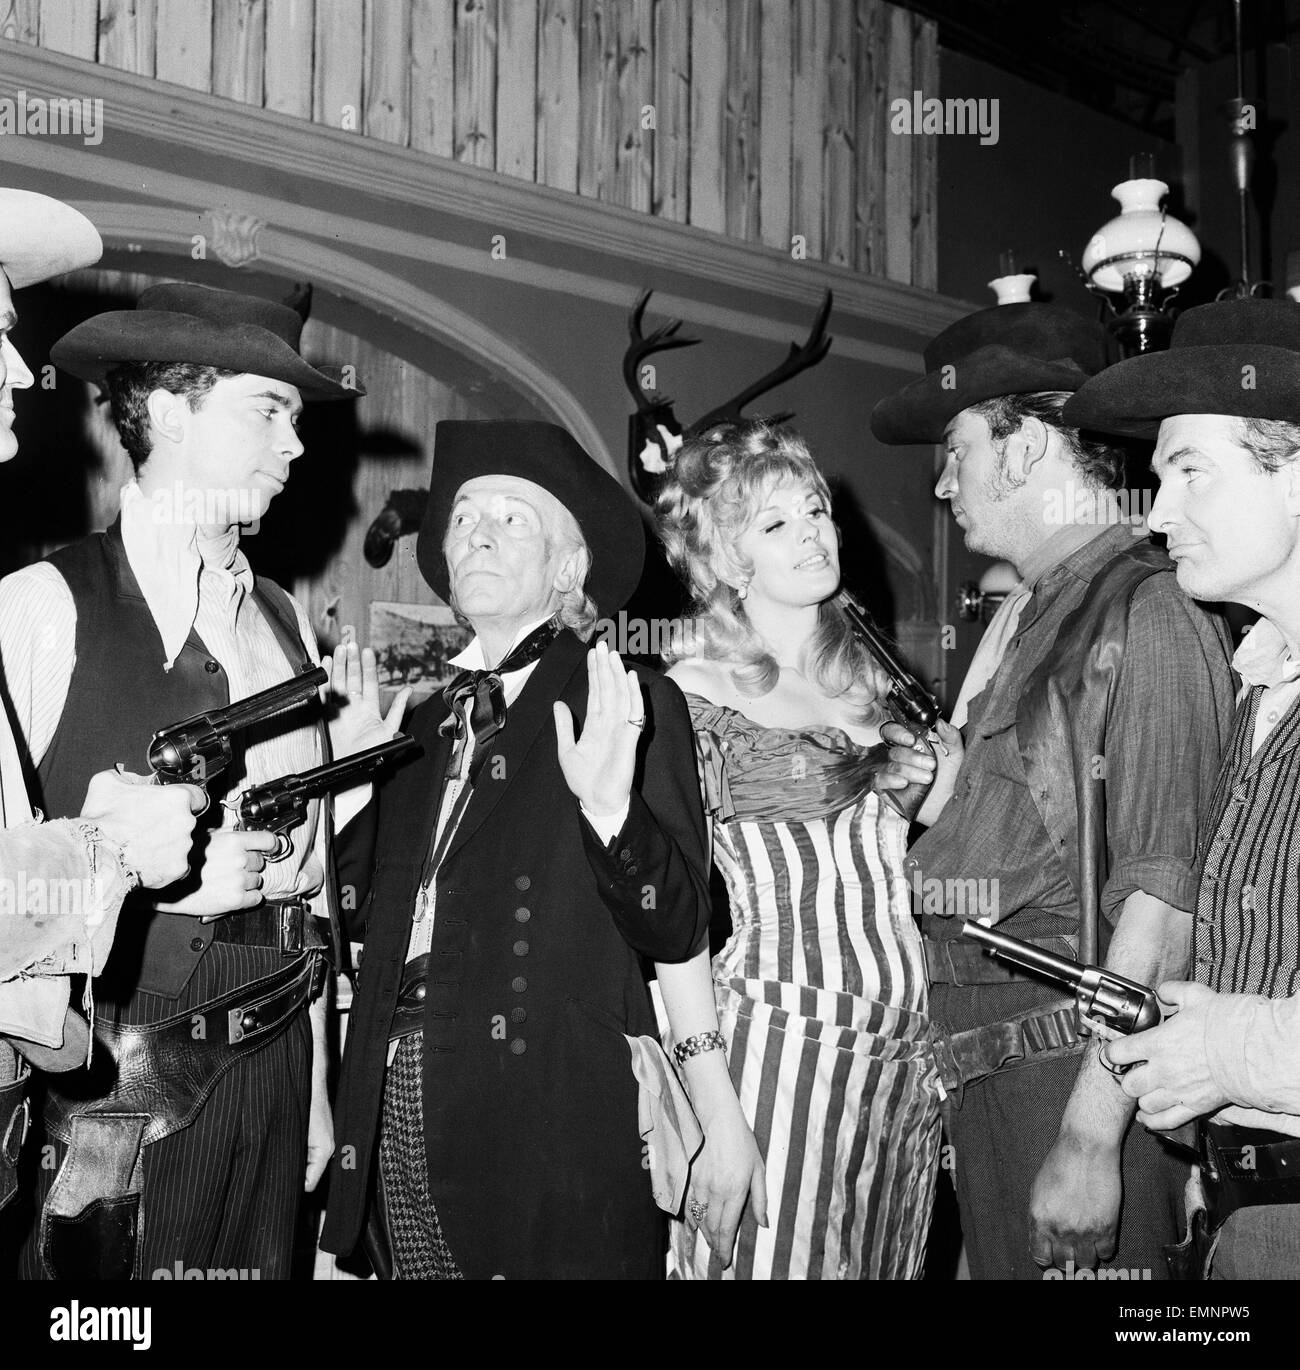 Actors rehearse for new Dr Who Story - The Gunfighters - at BBC Television Centre London 22nd April 1966. Pictured: William Hartnell - the first doctor & Sheena Marsh who plays Kate, pictured in a hold up scene in a Western Saloon Bar. Stock Photo